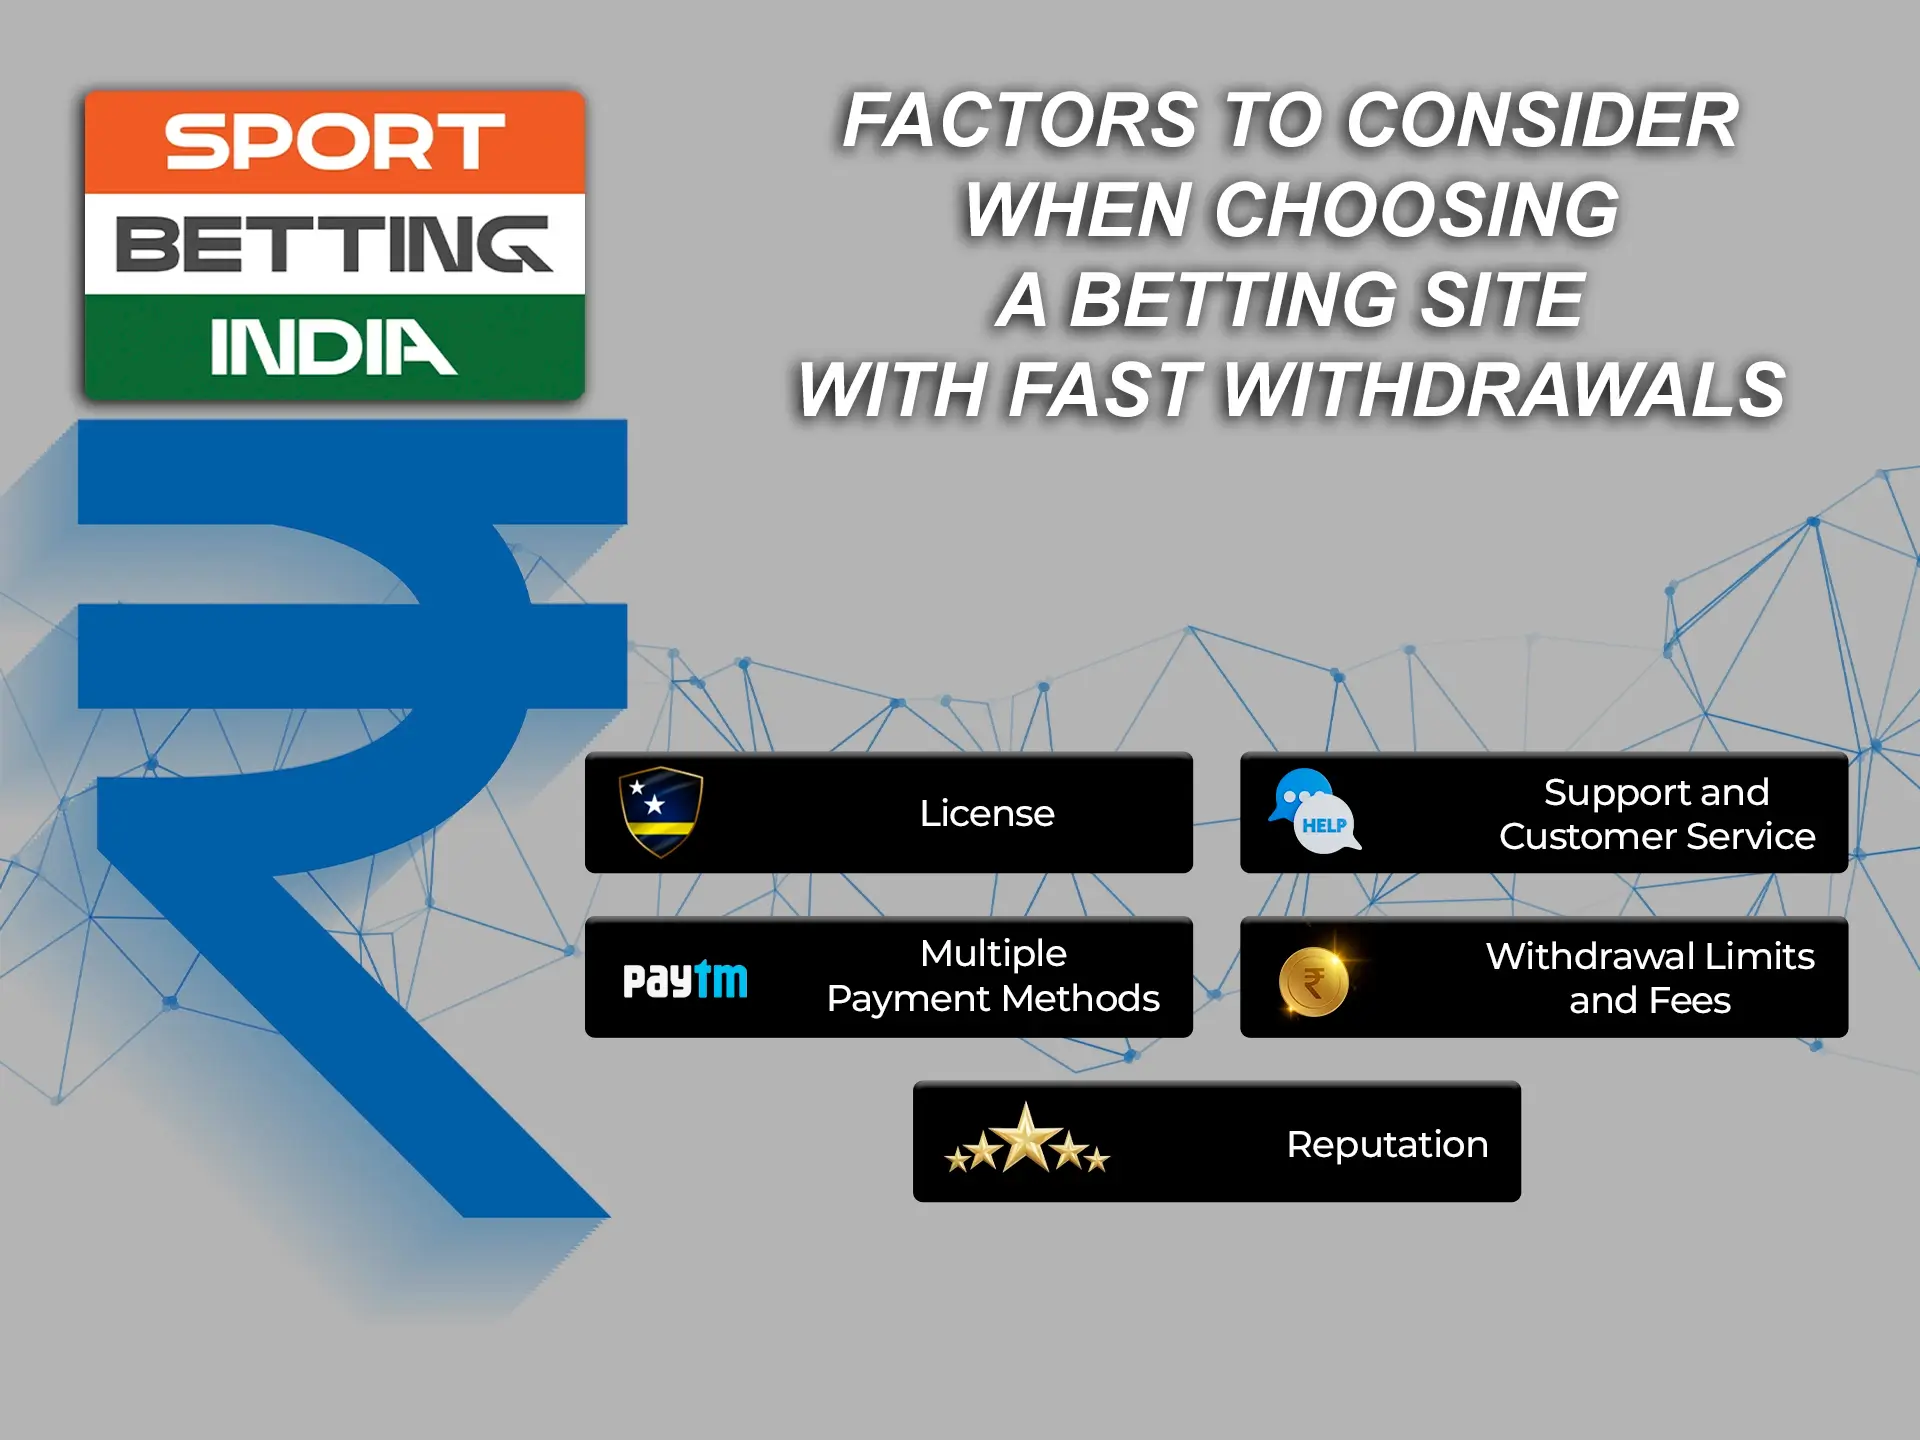 Take your time to research the important factors when choosing a casino for betting and withdrawing your winnings.